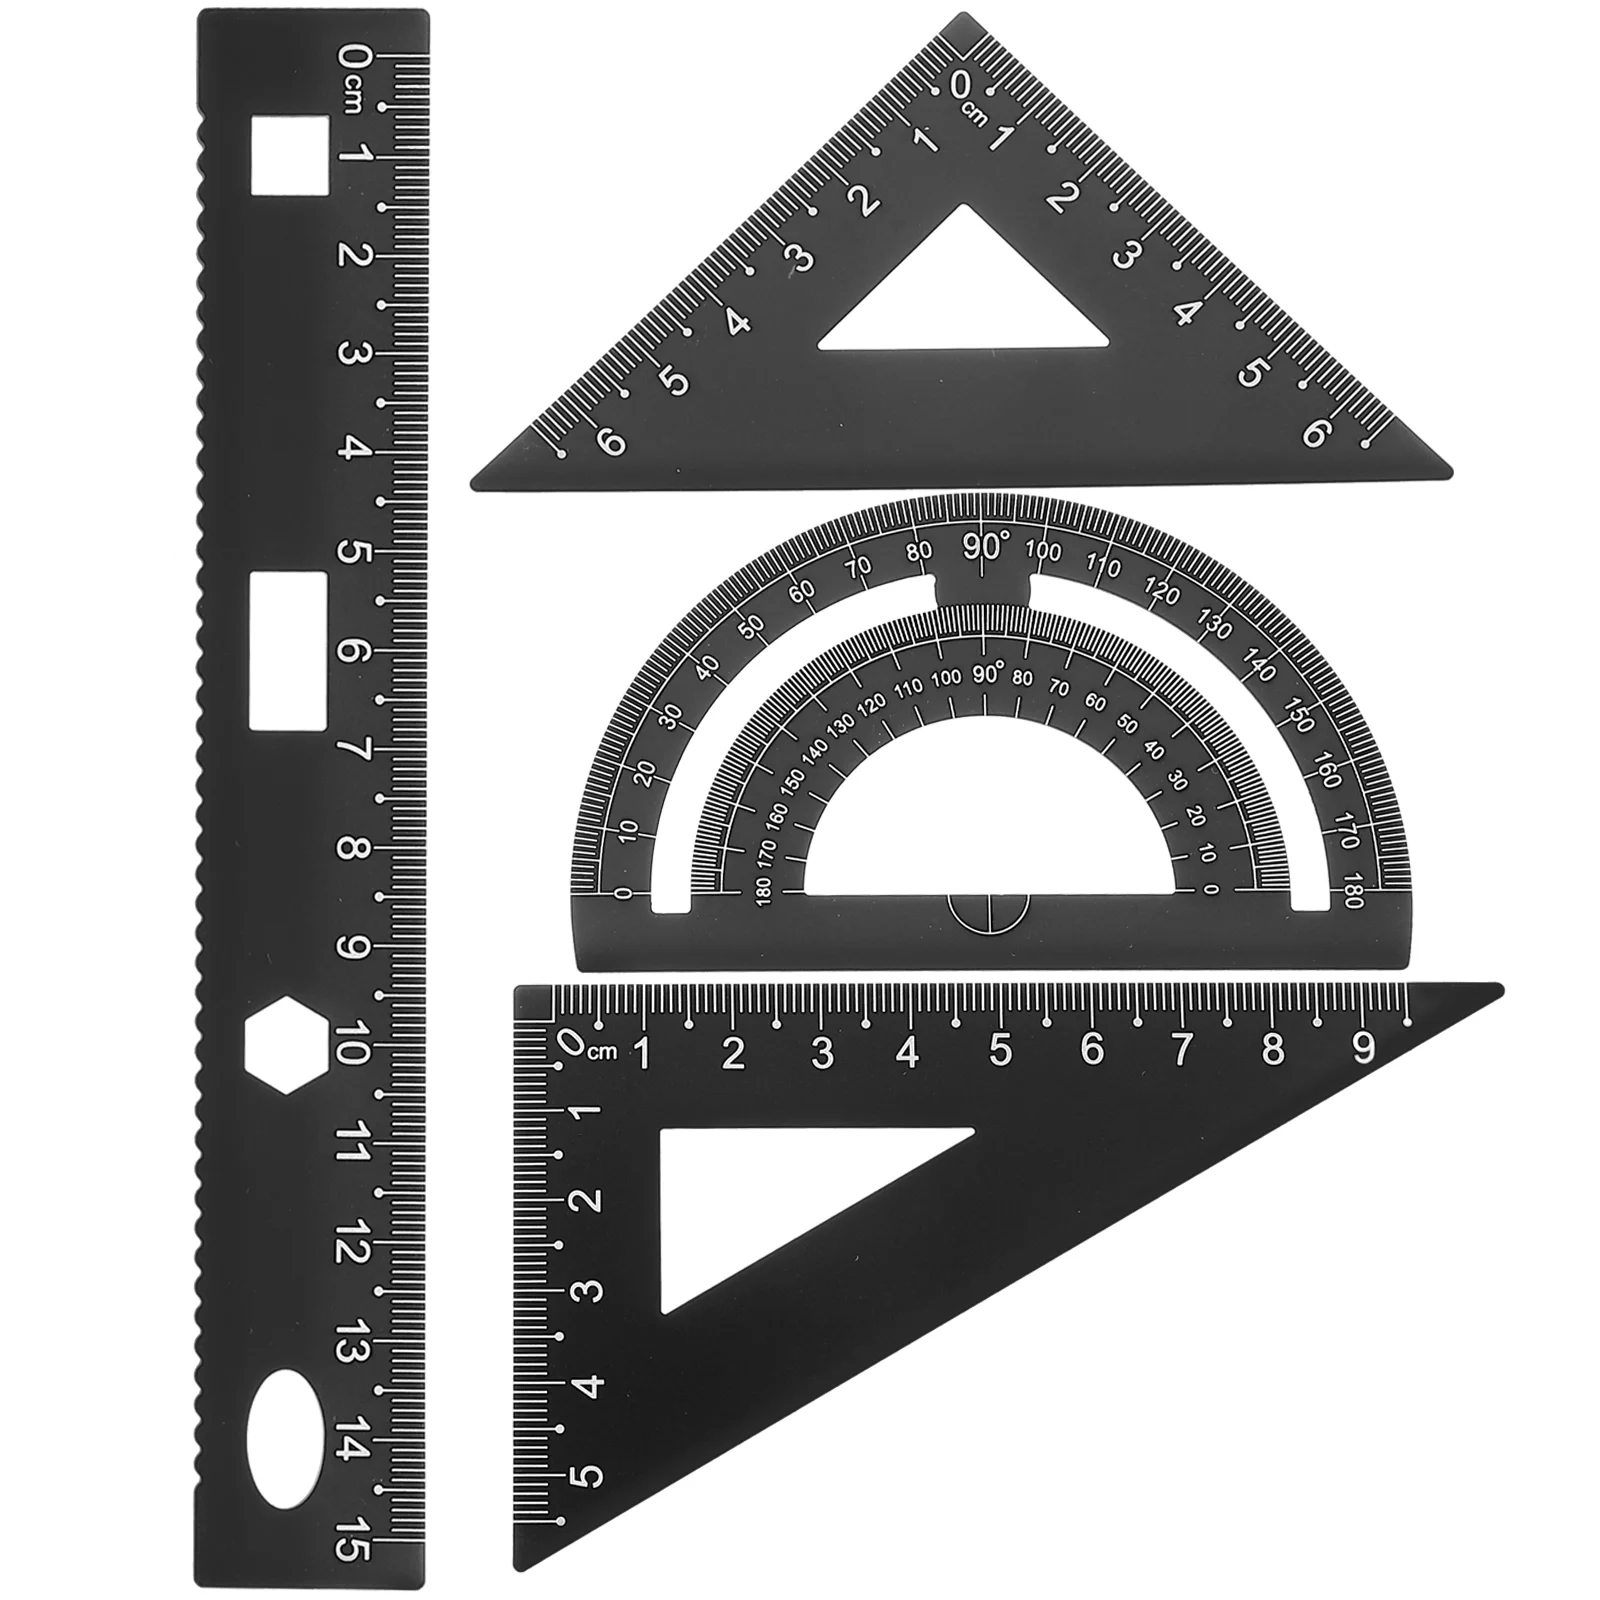 DIY Metal Machinist Ruler Stationery Set Sturdy Tool Triangular Plate Protractor Testing Machinist Ruler for Pupils